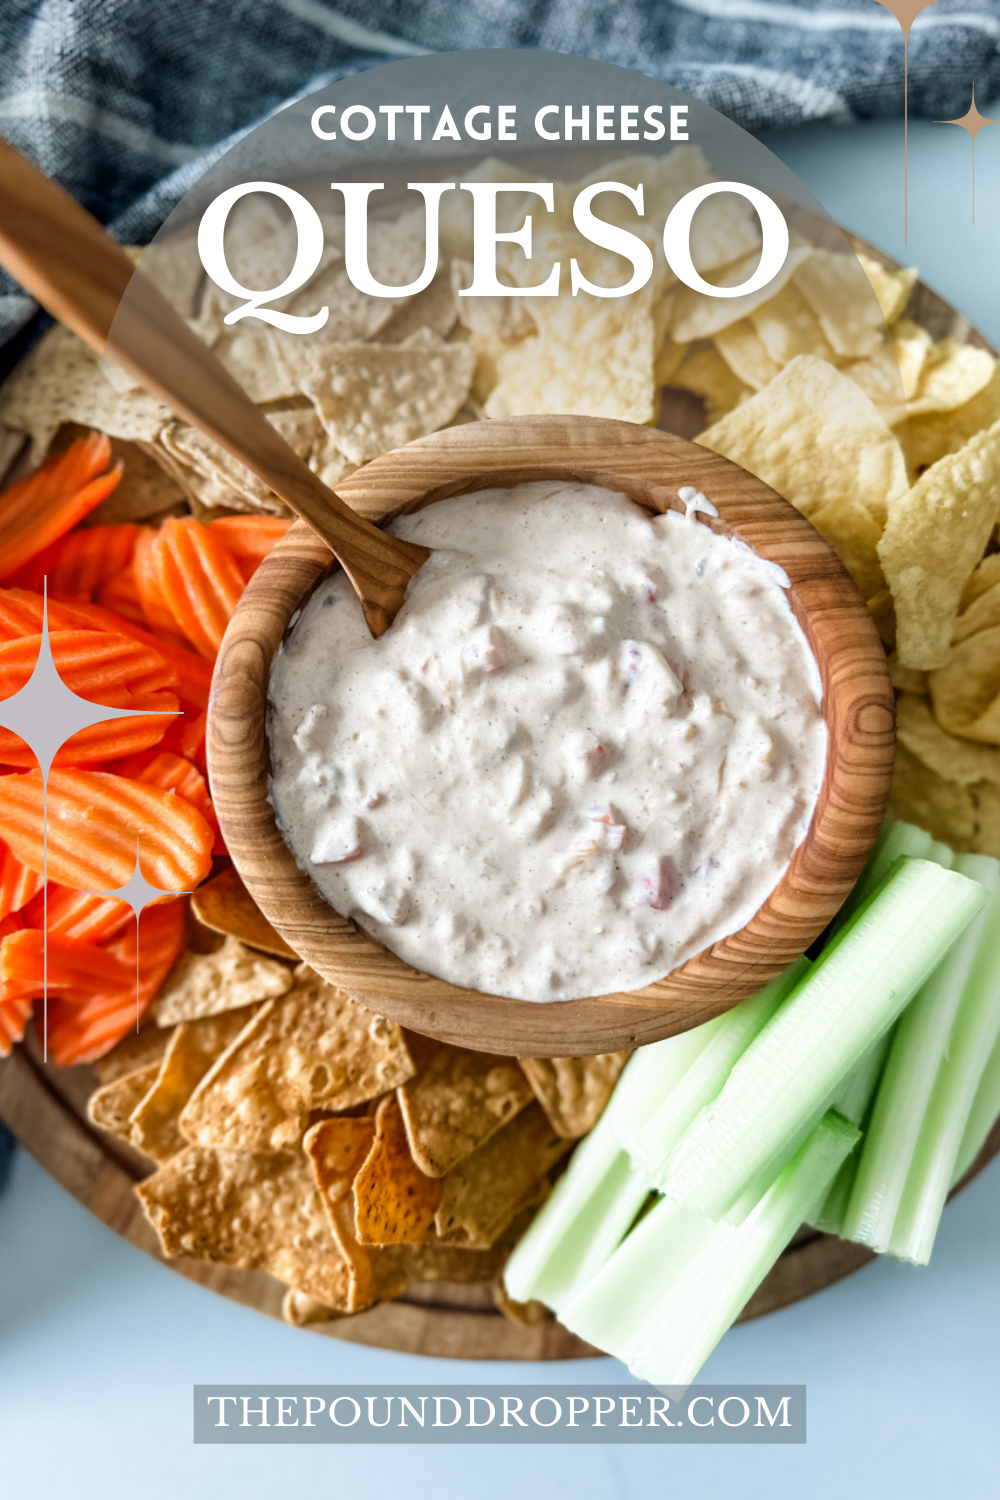 Cottage Cheese Queso Dip via @pounddropper